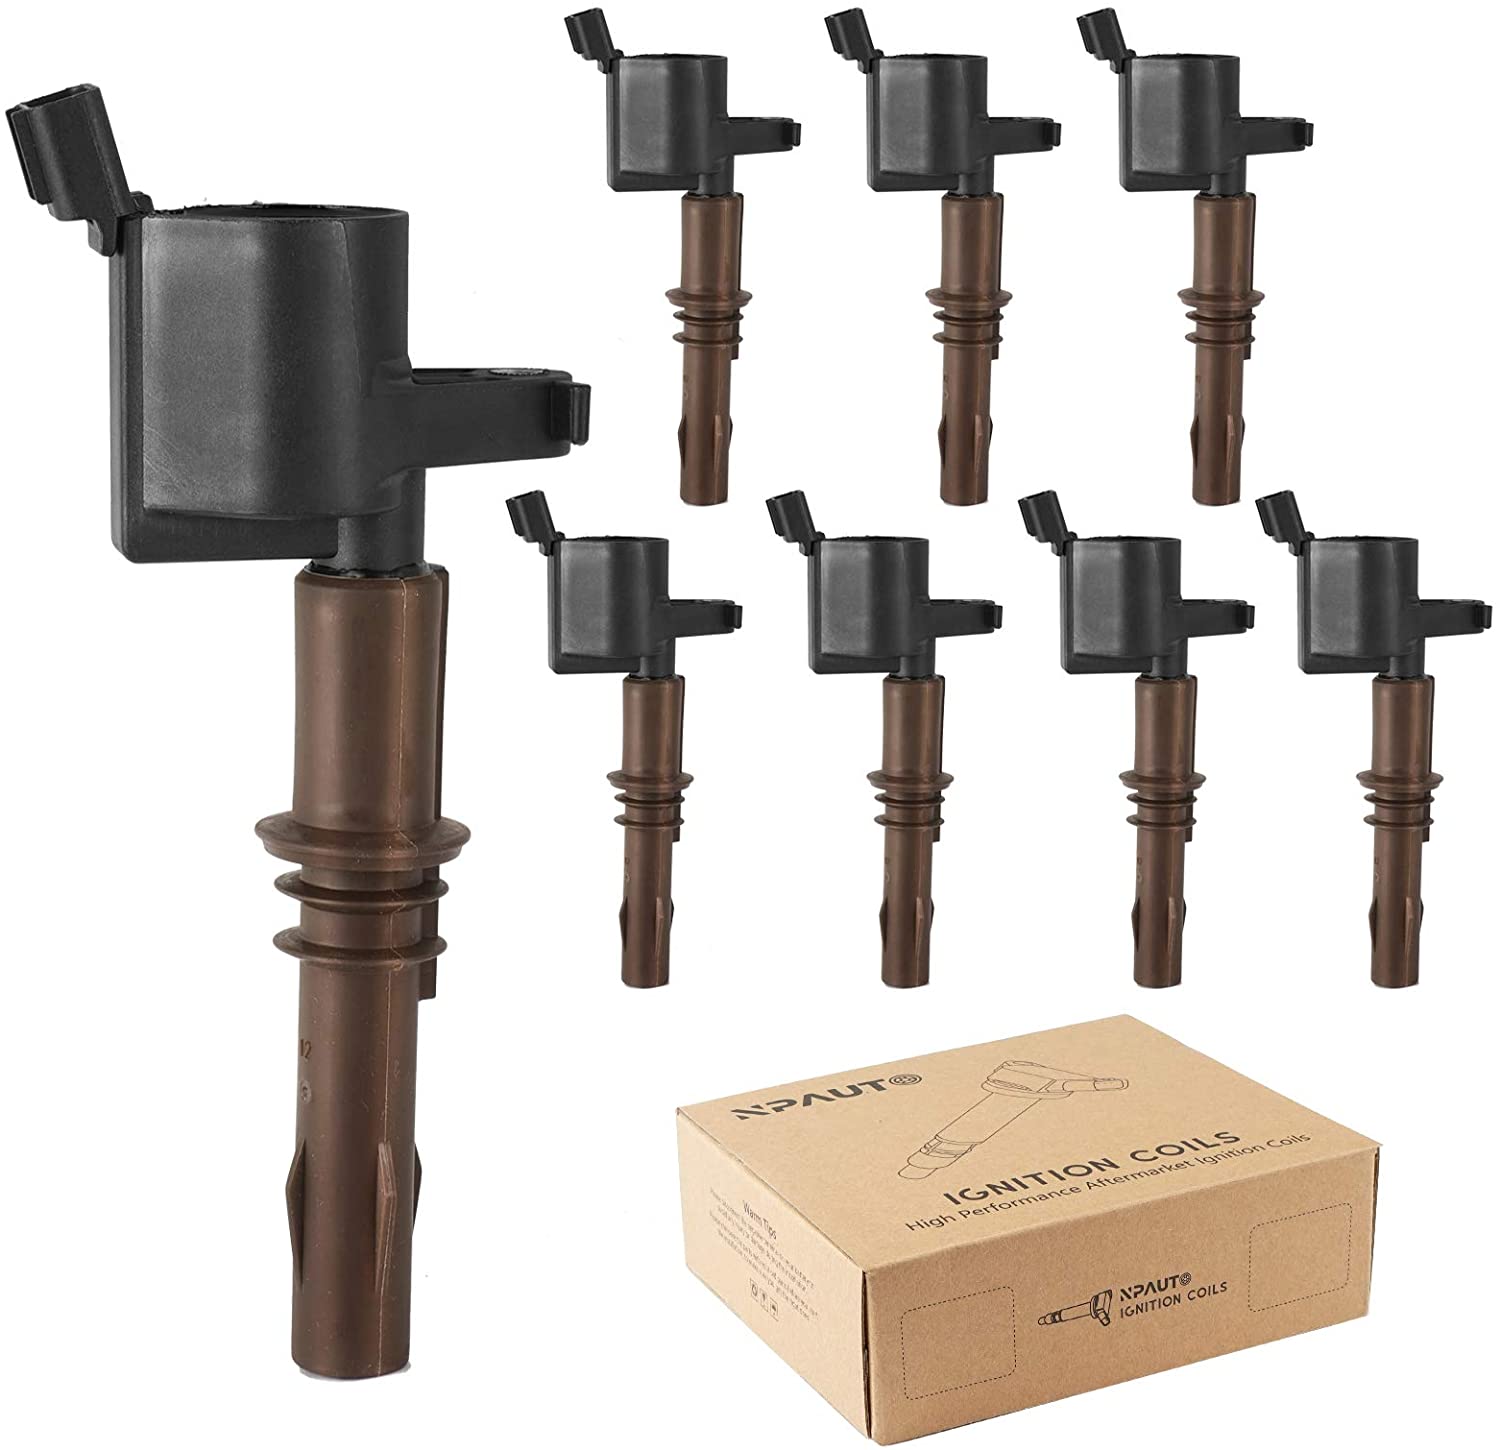 NPAUTO Ignition Coils Compatible with 2008 2009 2010 Ford F150 F250 F350 Super Duty, Expedition Explorer Mustang Lincoln Navigator Mercury Mountaineer V8 4.6L 5.4L, Brown Boot C1659 DG521, Pack of 8